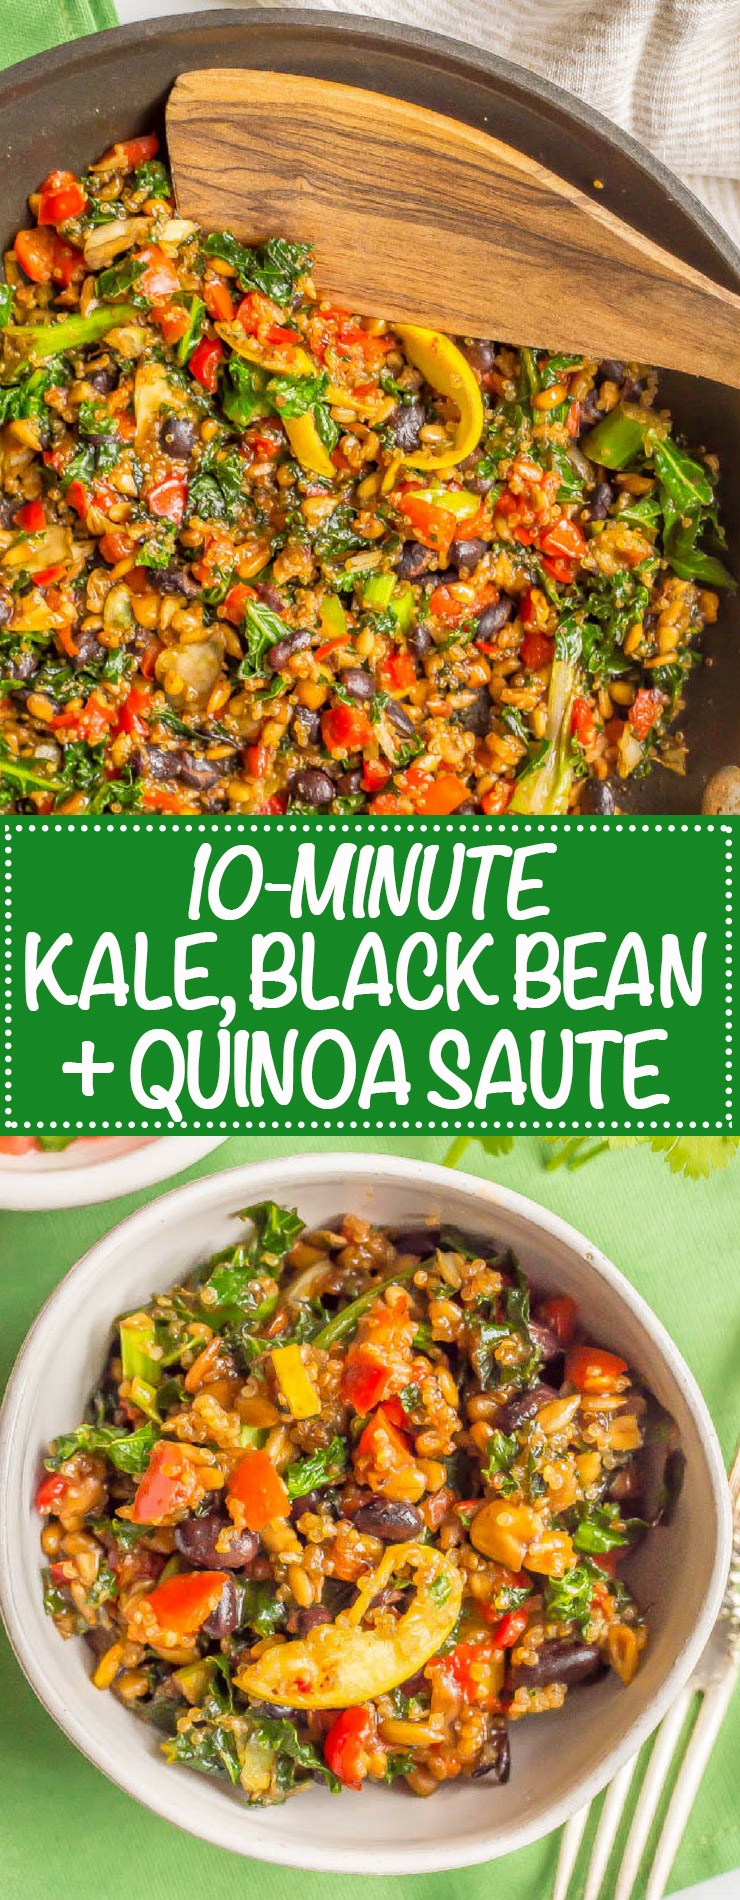 Kale black bean quinoa sauté is a meal kit in a bag that takes less than 10 minutes to cook! It’s perfect for a quick and easy vegetarian weeknight dinner or a satisfying, hearty hot lunch. | www.familyfoodonthetable.com